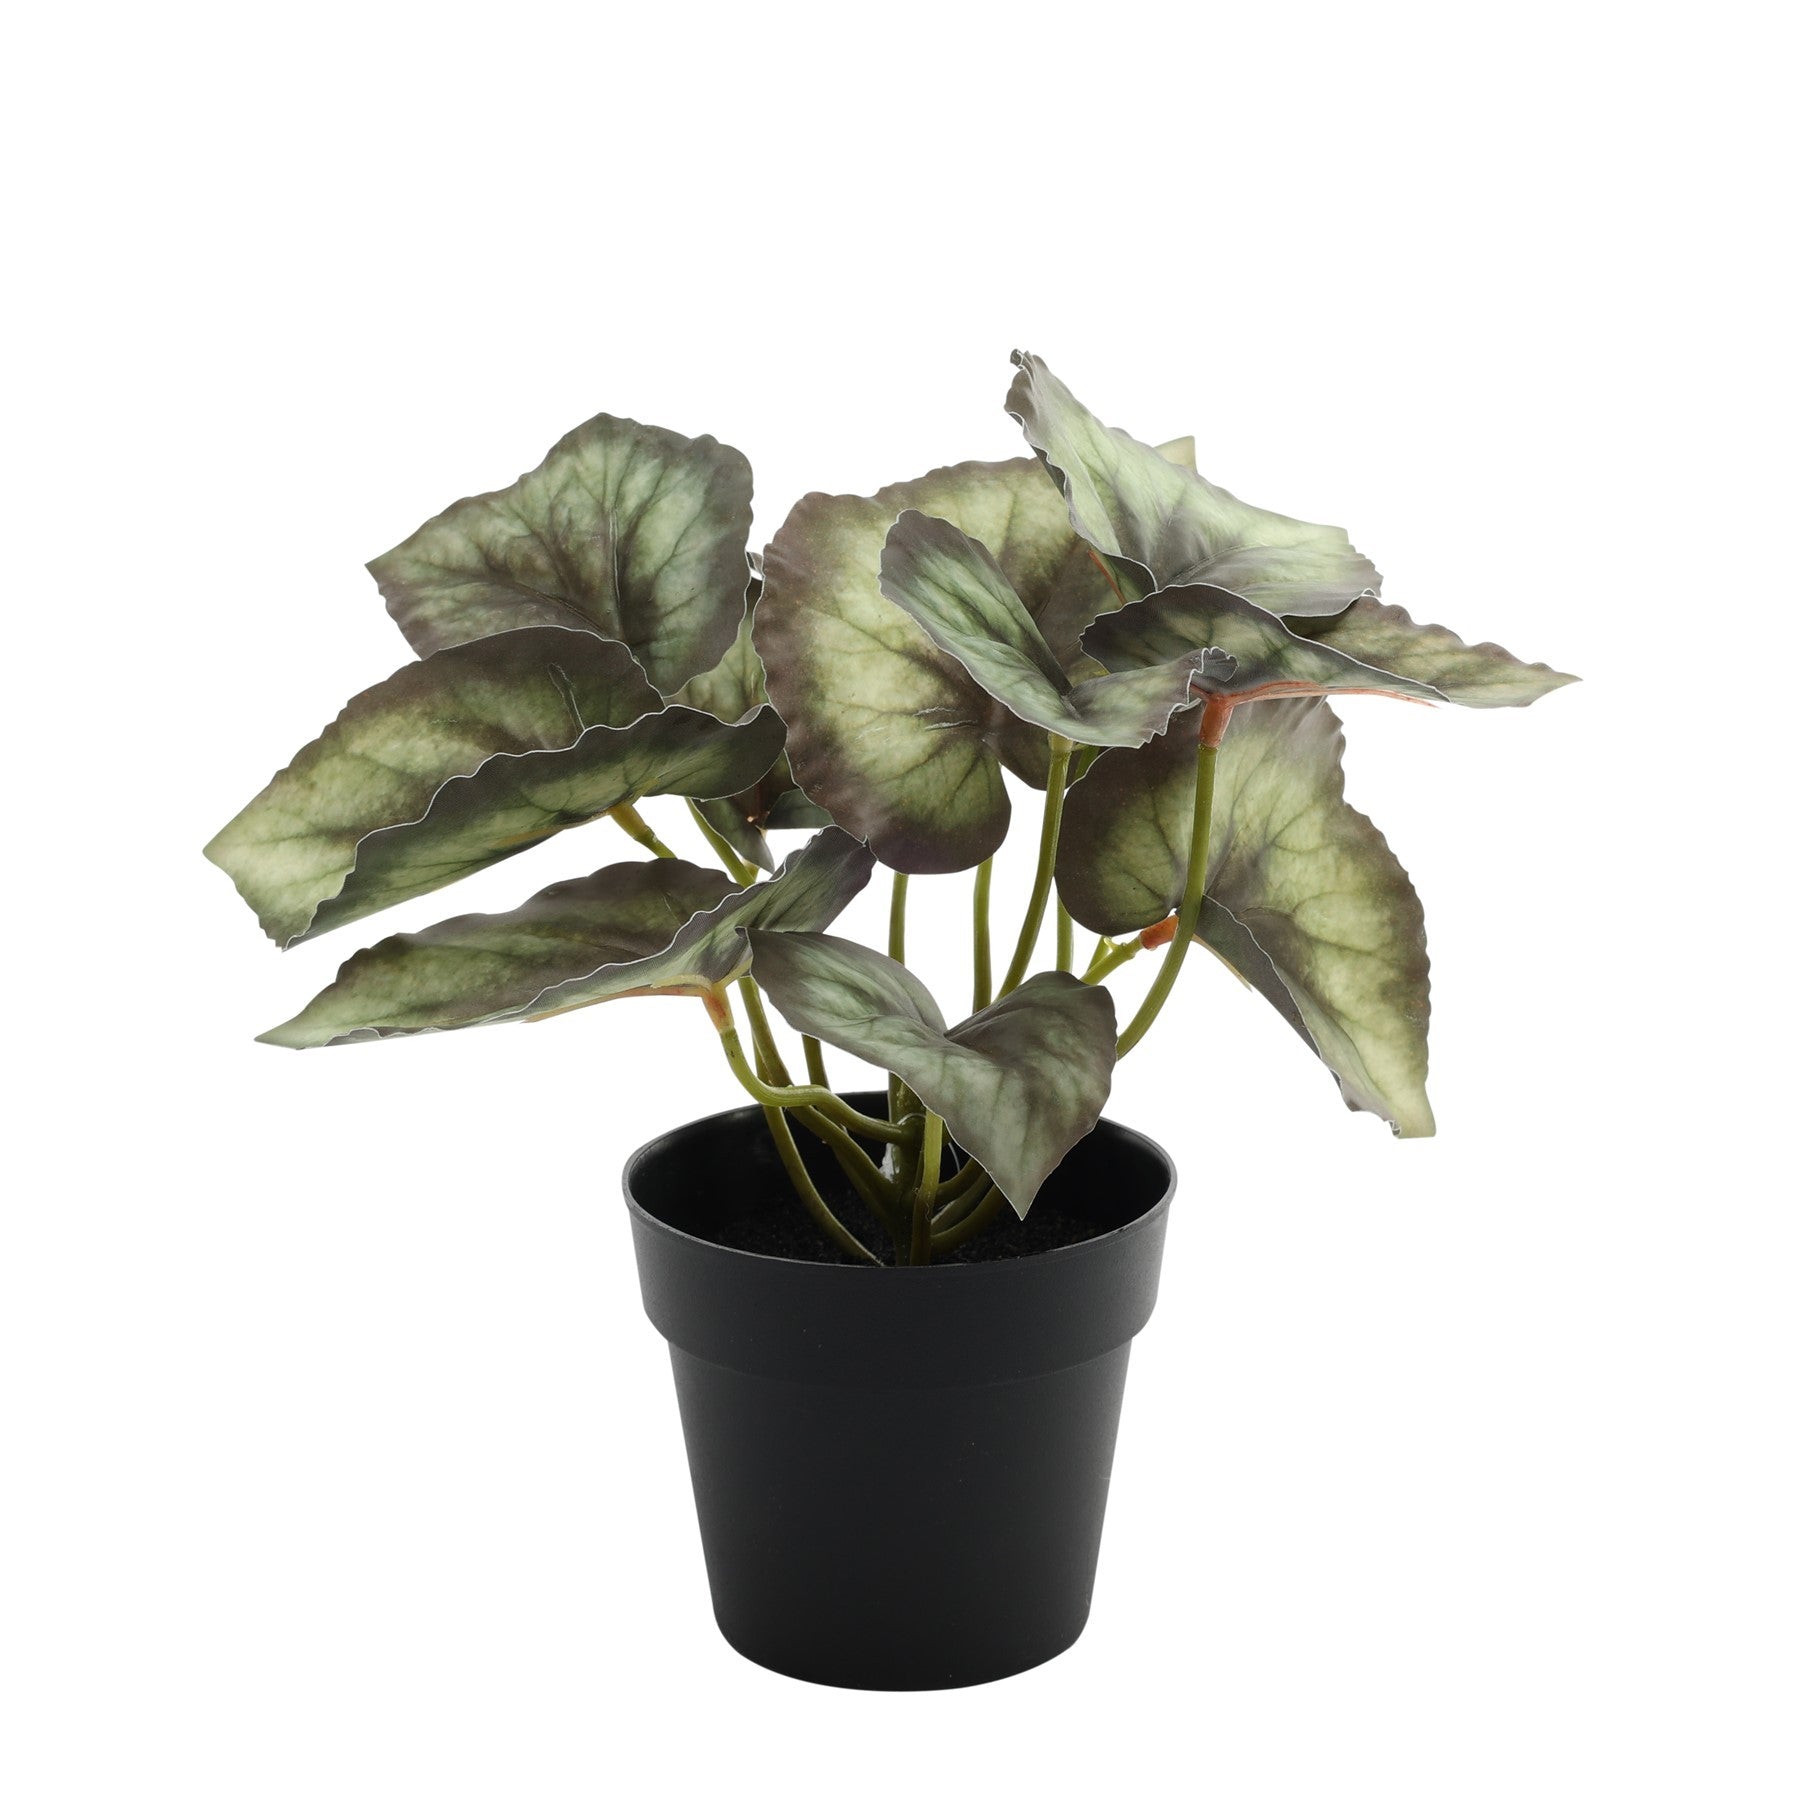 View Begonia Potted House Plant 22cm information